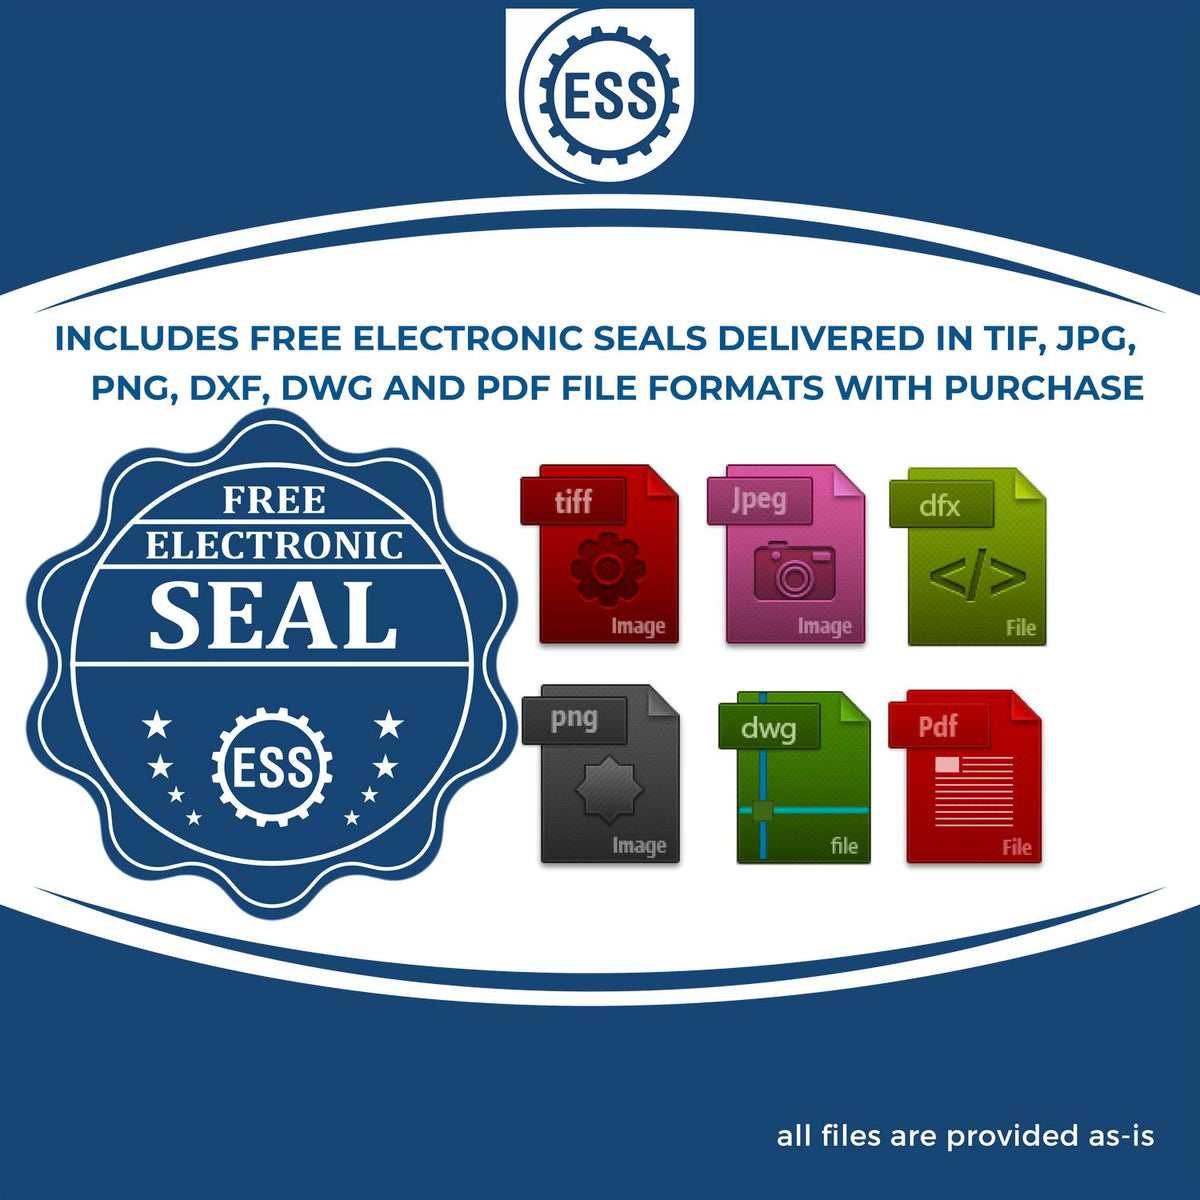 An infographic for the free electronic seal for the Slim Pre-Inked Alabama Architect Seal Stamp illustrating the different file type icons such as DXF, DWG, TIF, JPG and PNG.